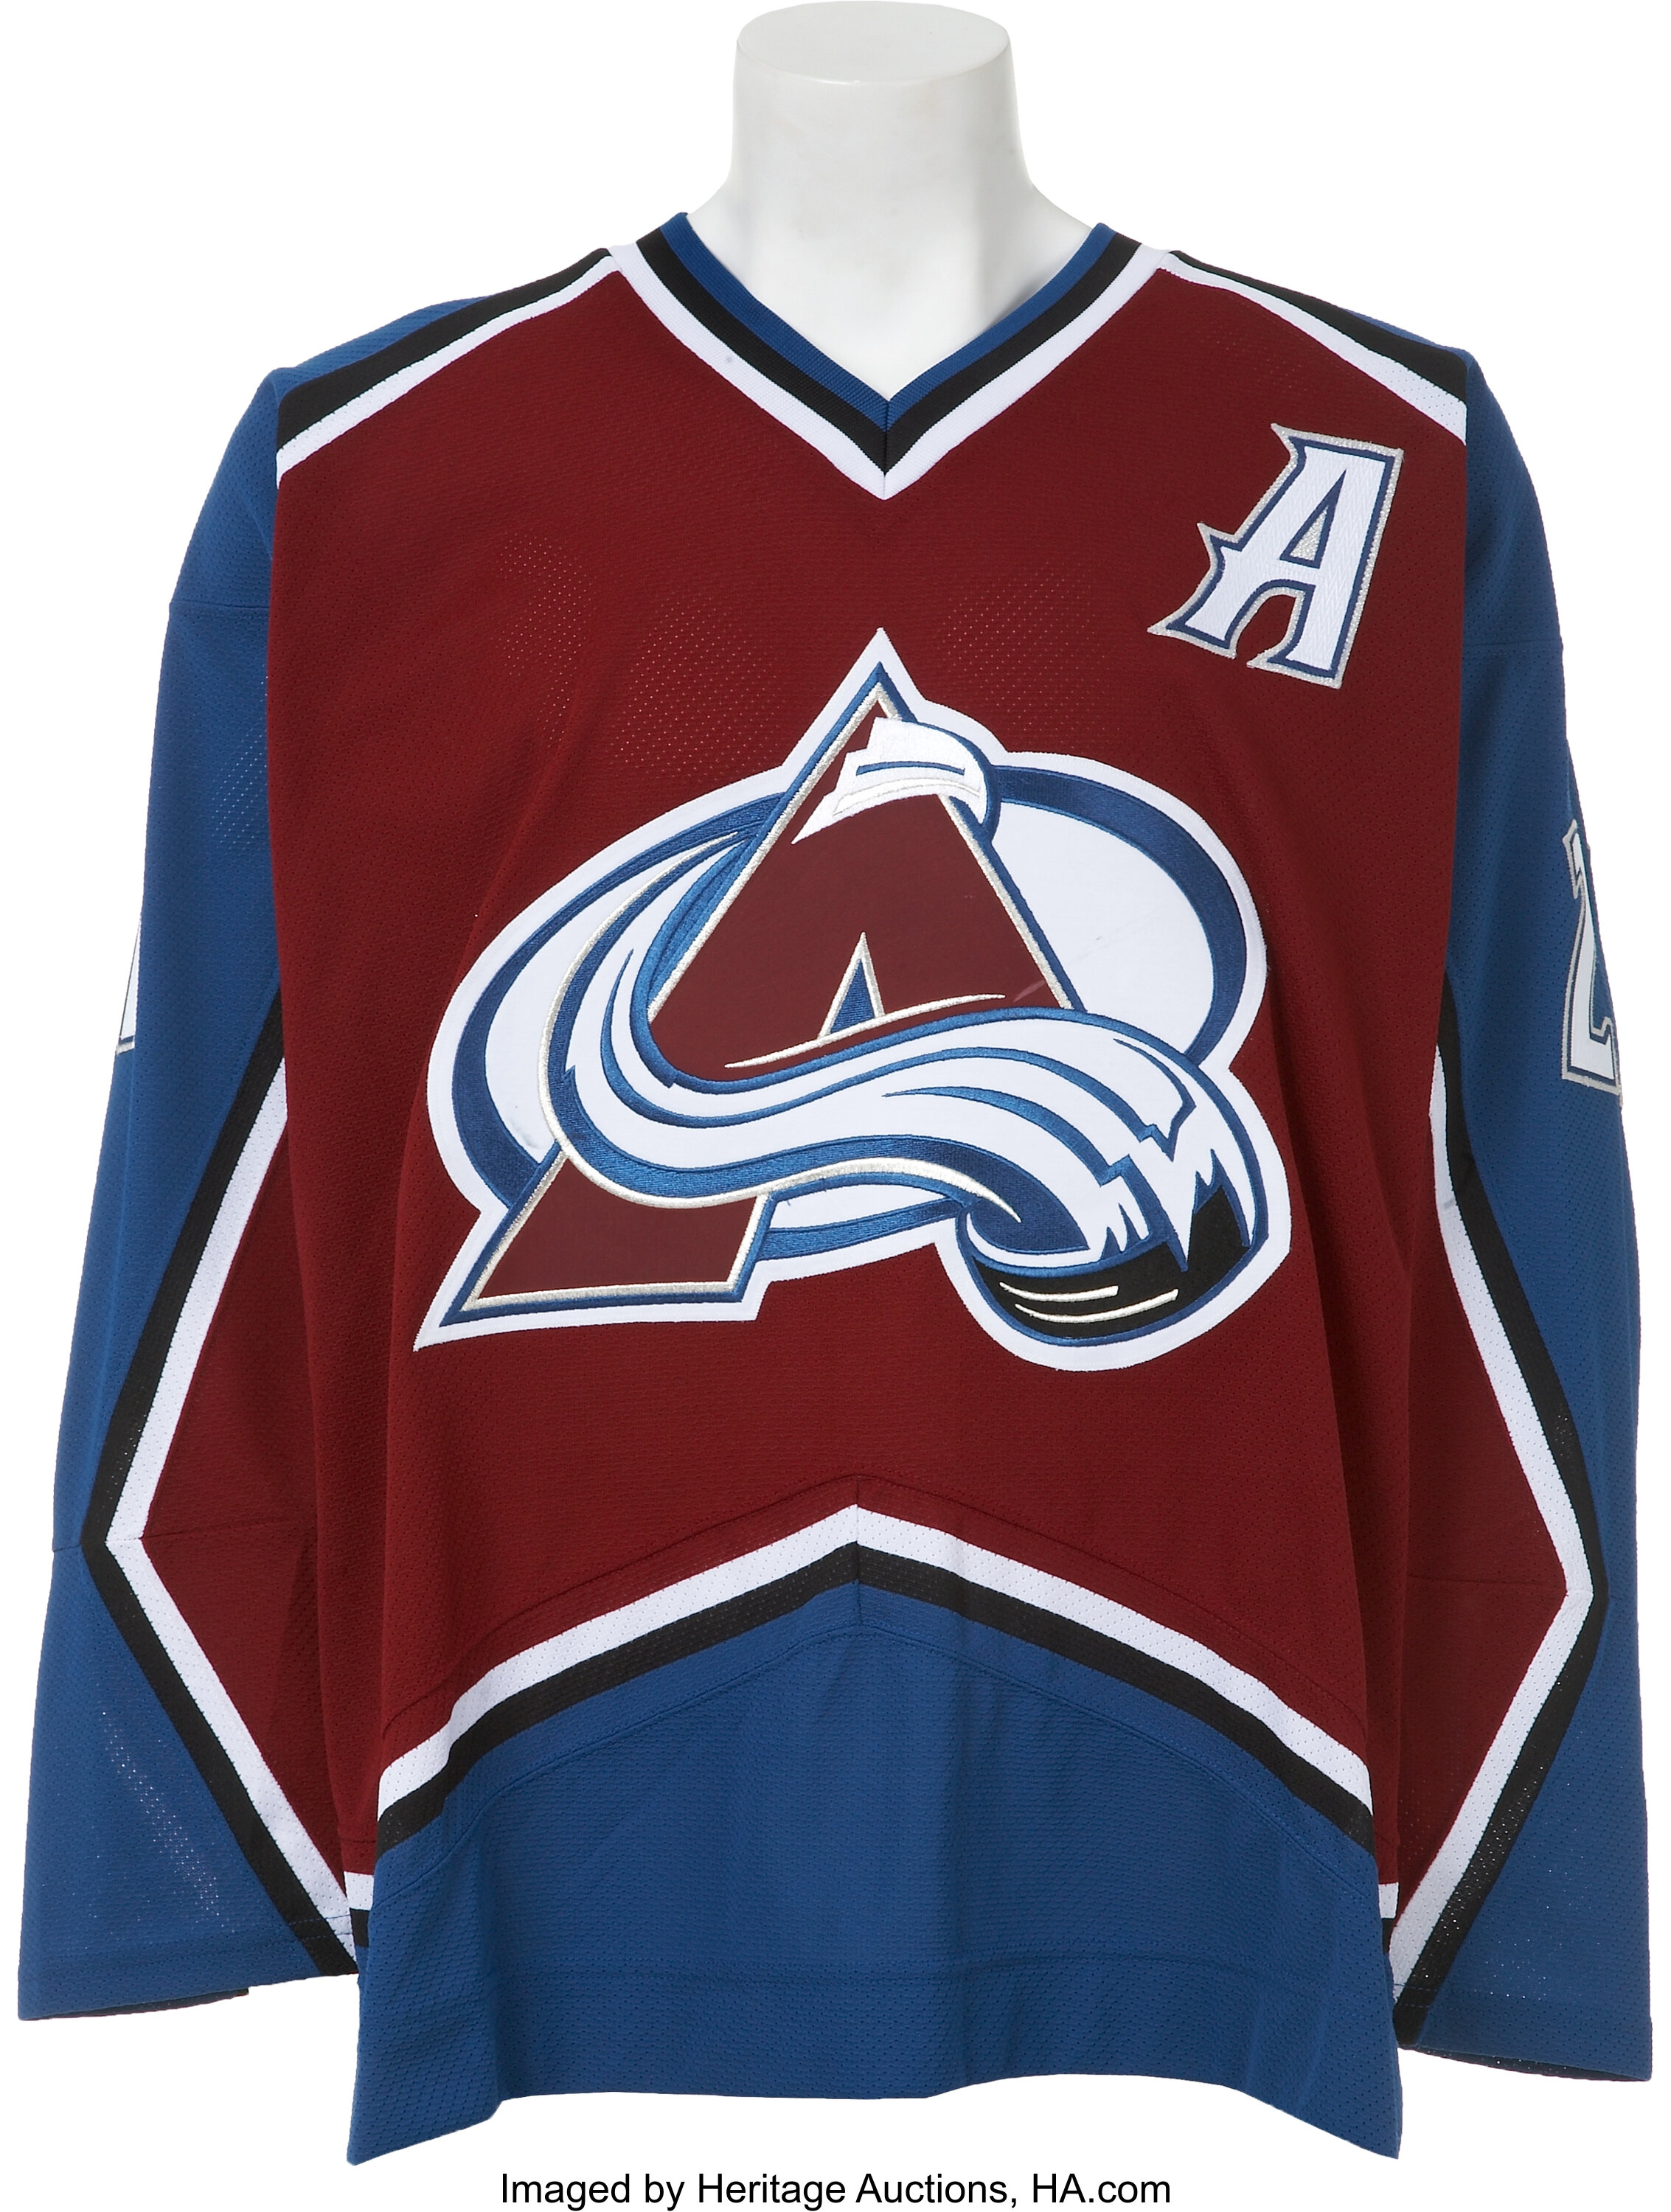 Peter Forsberg 2004 Game Worn Jersey: Another One Game Wonder